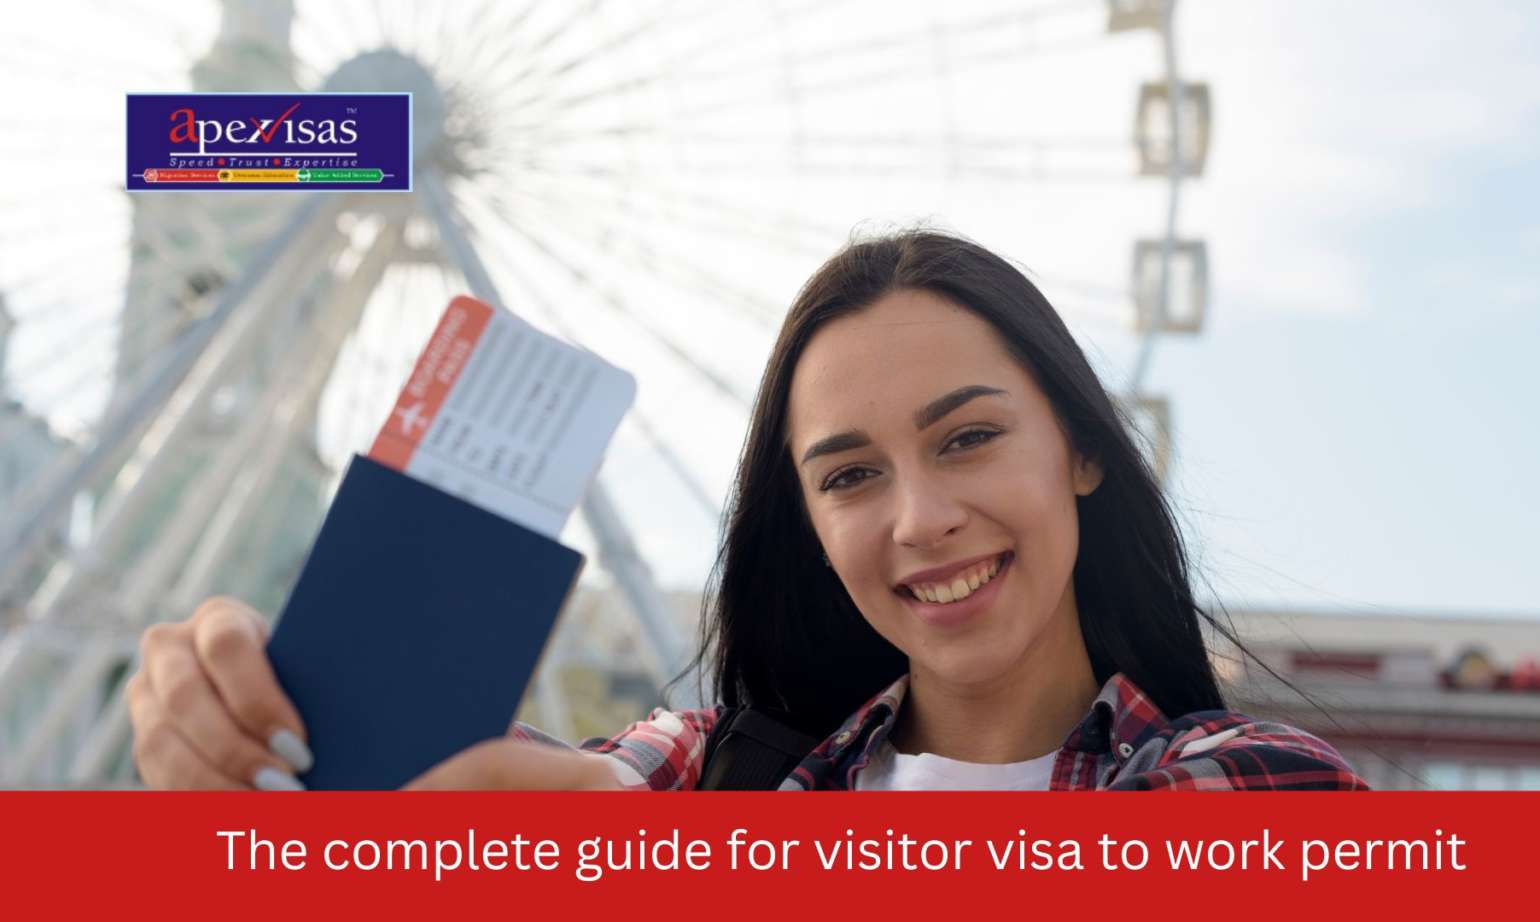 The complete guide for visitor visa to work permit